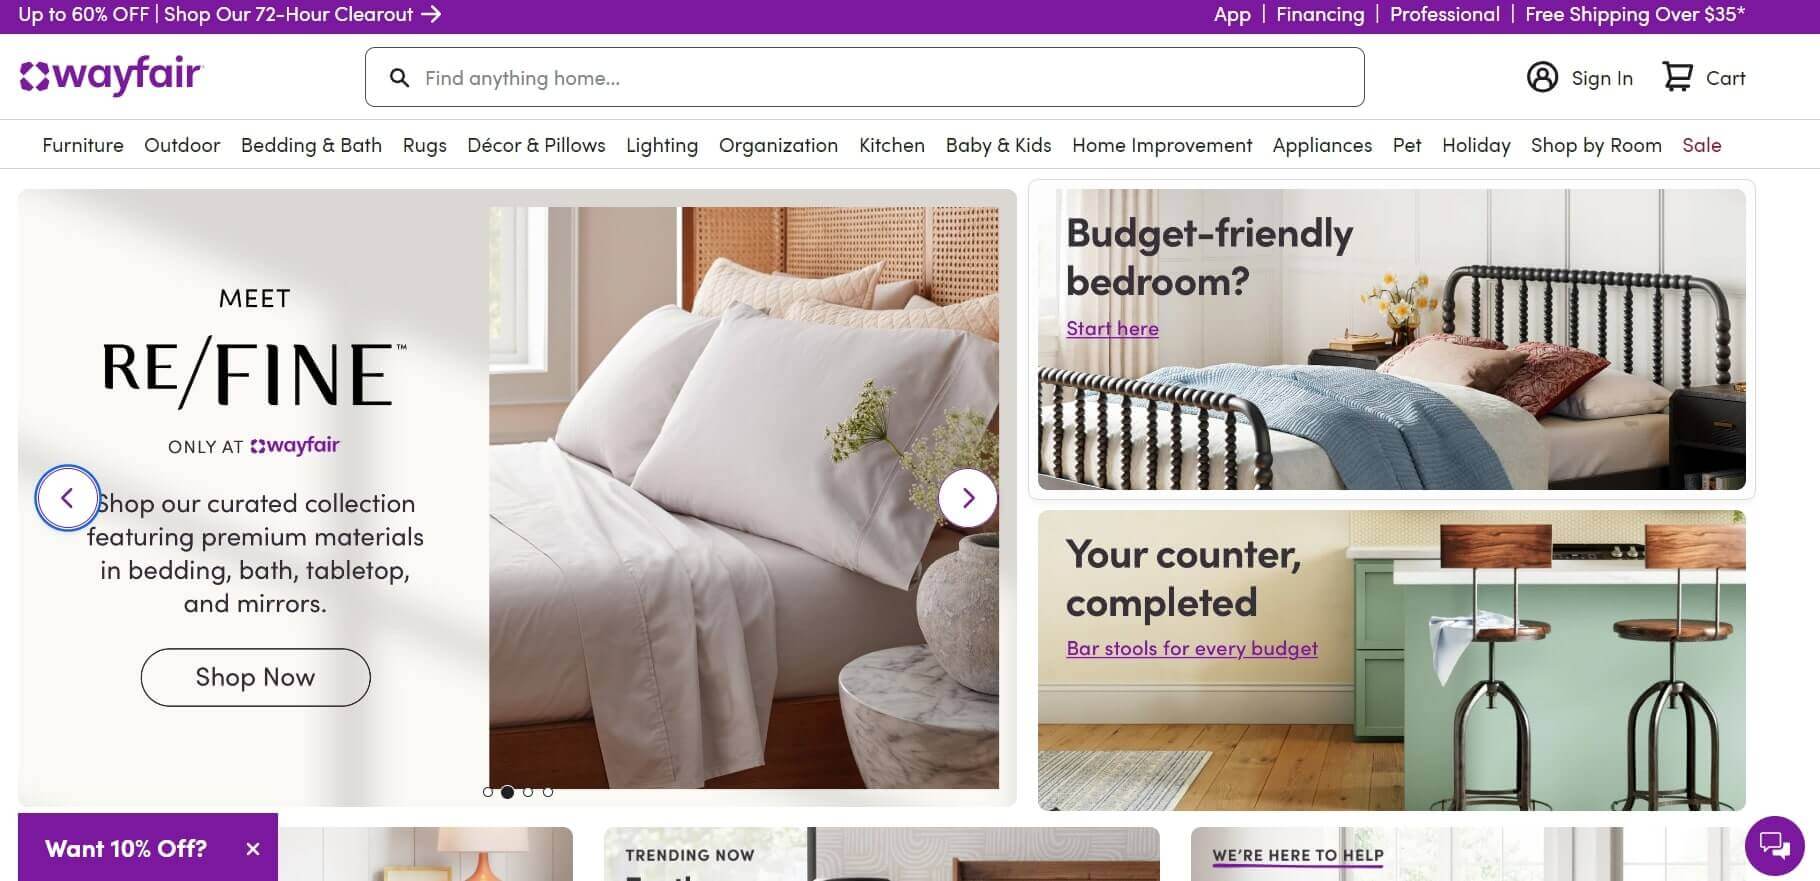 A screenshot of Wayfair company featuring home goods such as bed linen and counters.